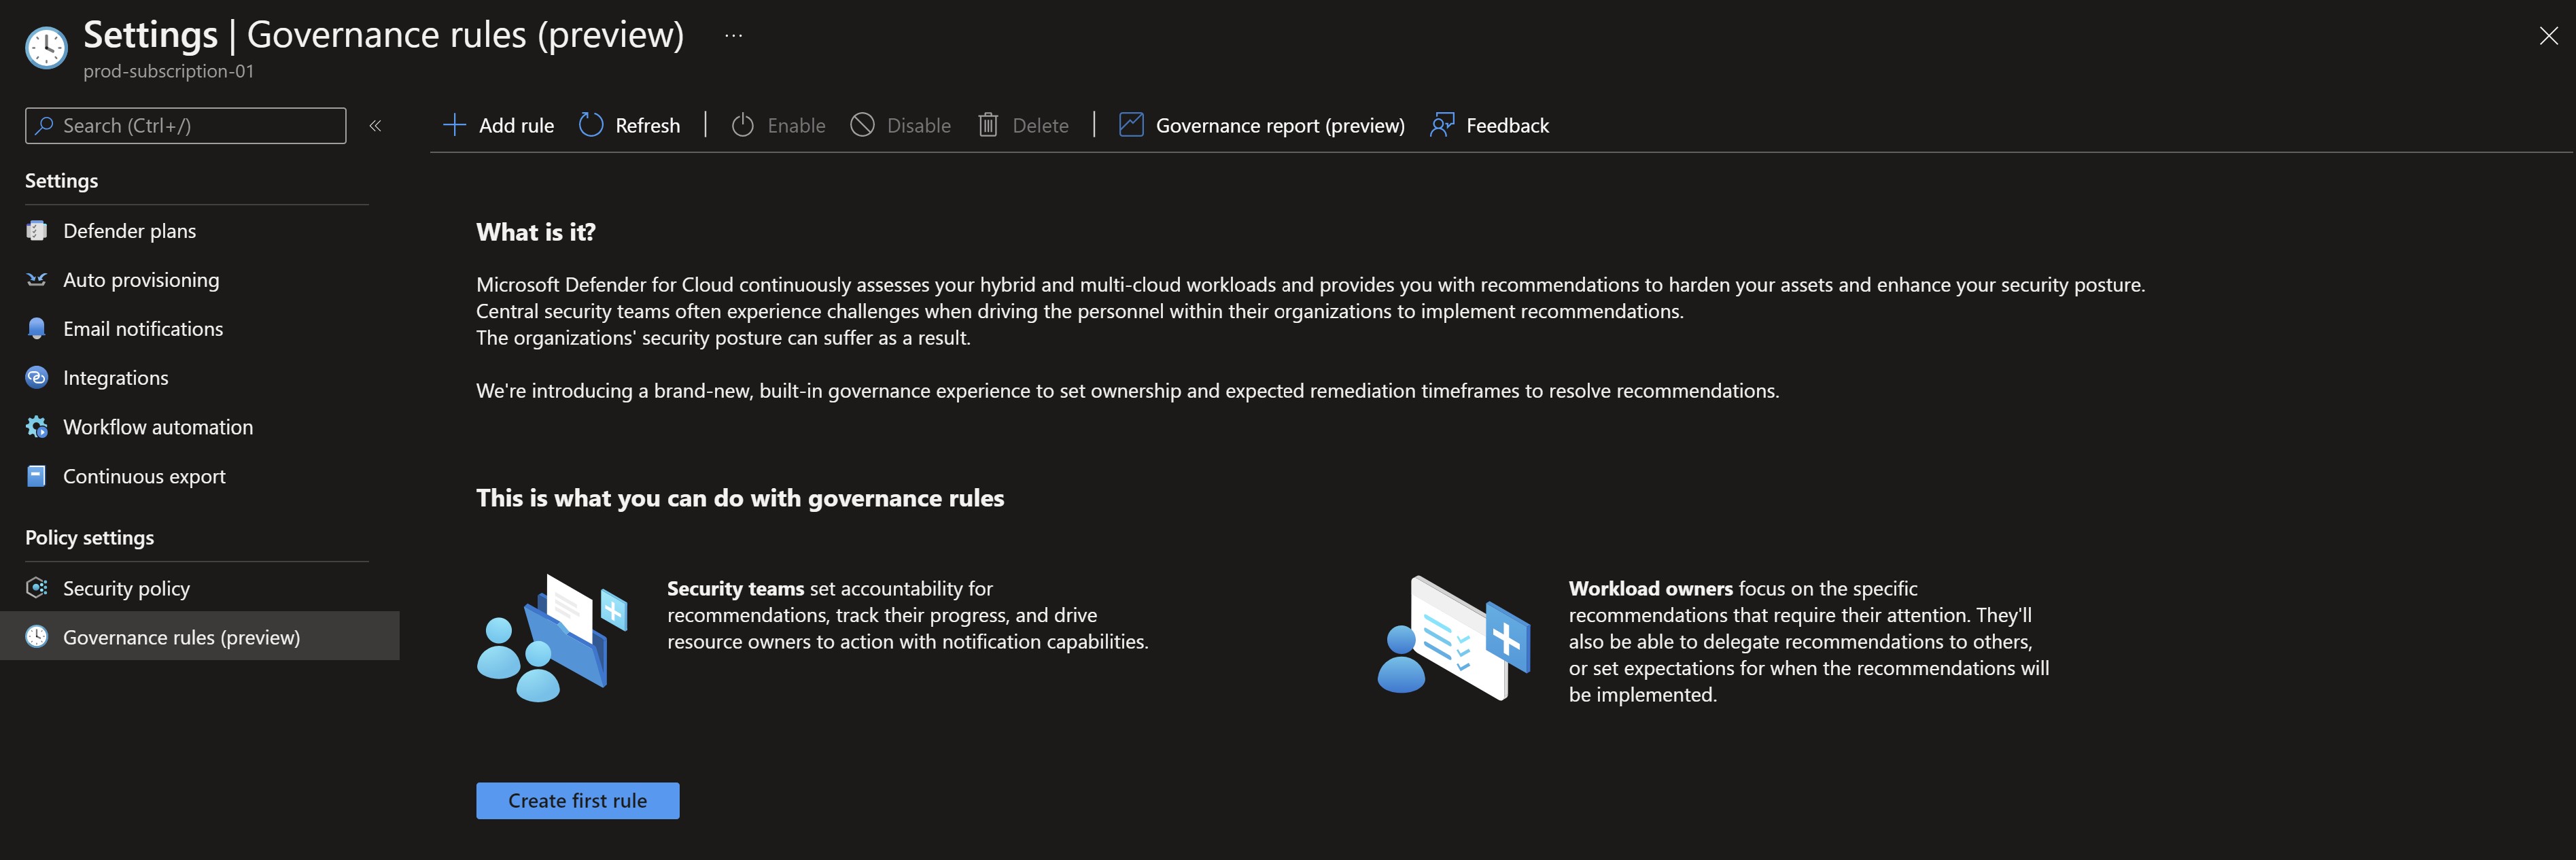 Screenshot showing the Microsoft Defender for Cloud portal with governance rules